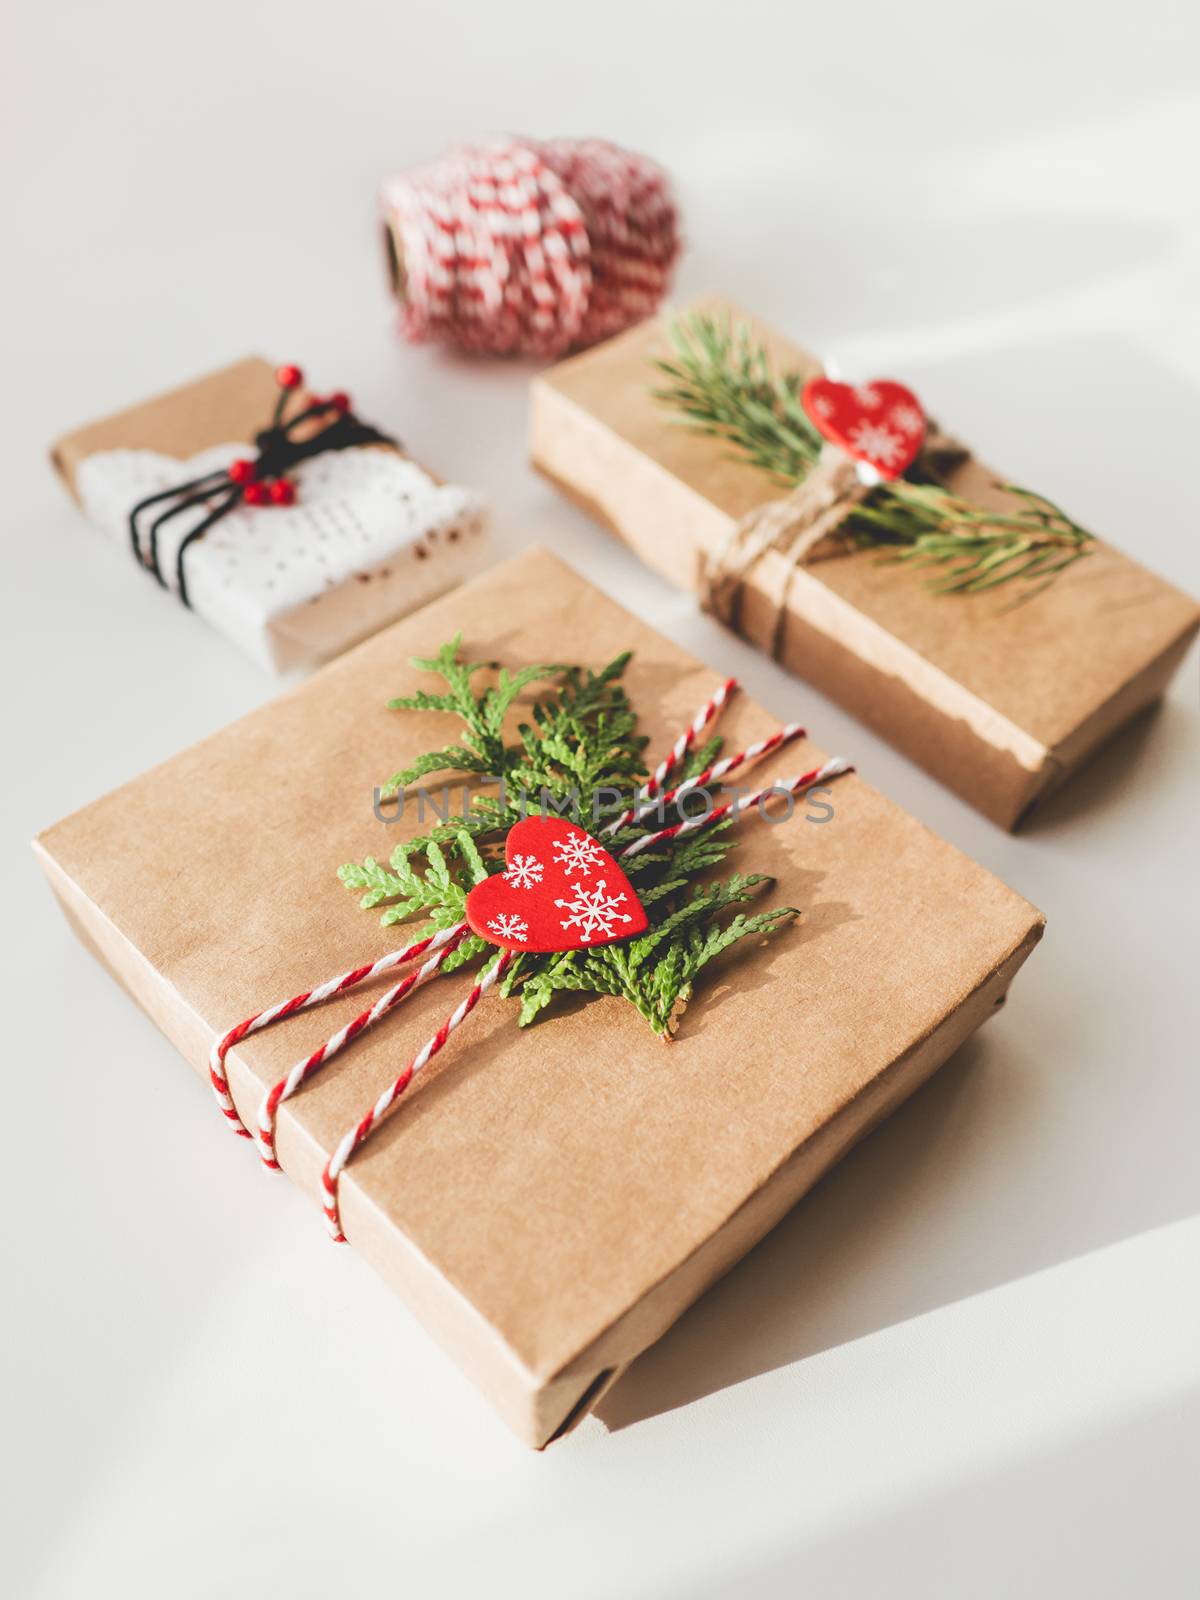 Christmas DIY presents wrapped in craft paper with fir tree bran by aksenovko